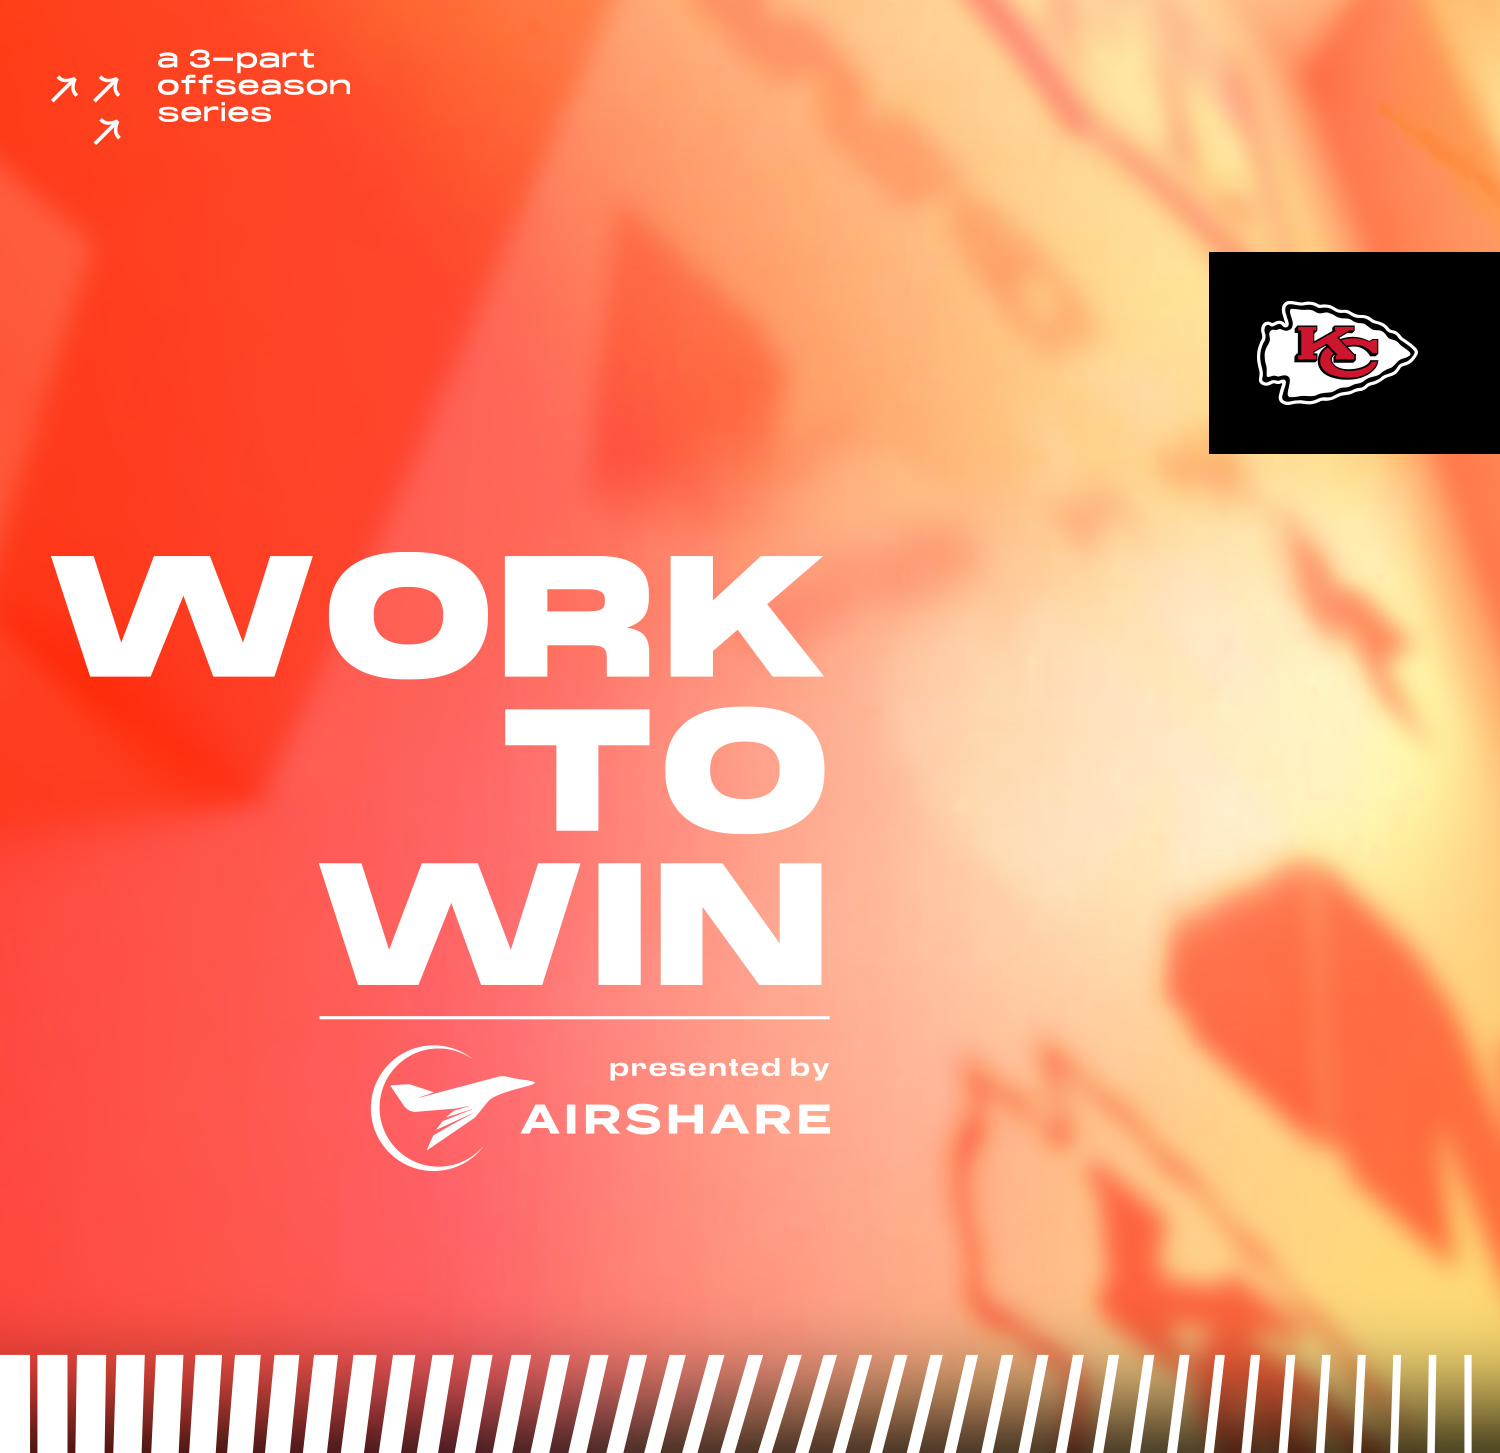 Work to Win Cover art for Chiefs 3-part offseason series presented by Airshare